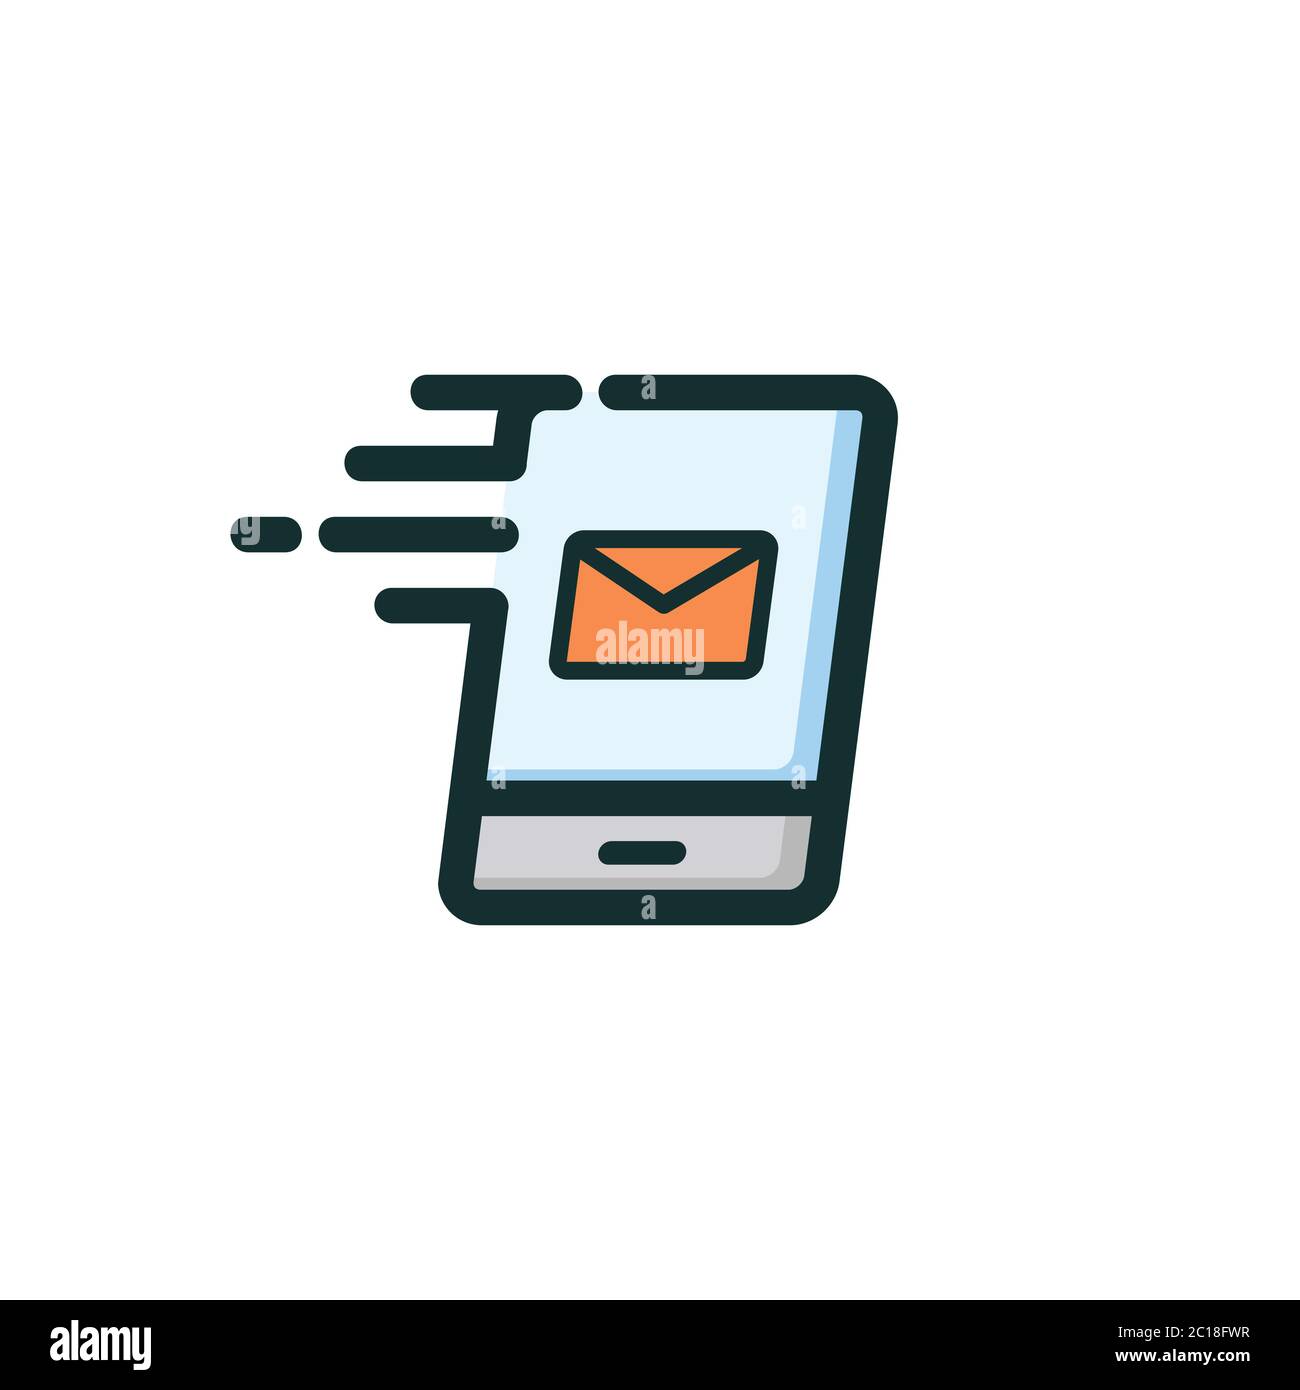 Sending message using smartphone icon. Suitable for design element of multimedia messaging technology facilities in smartphone system. Stock Vector